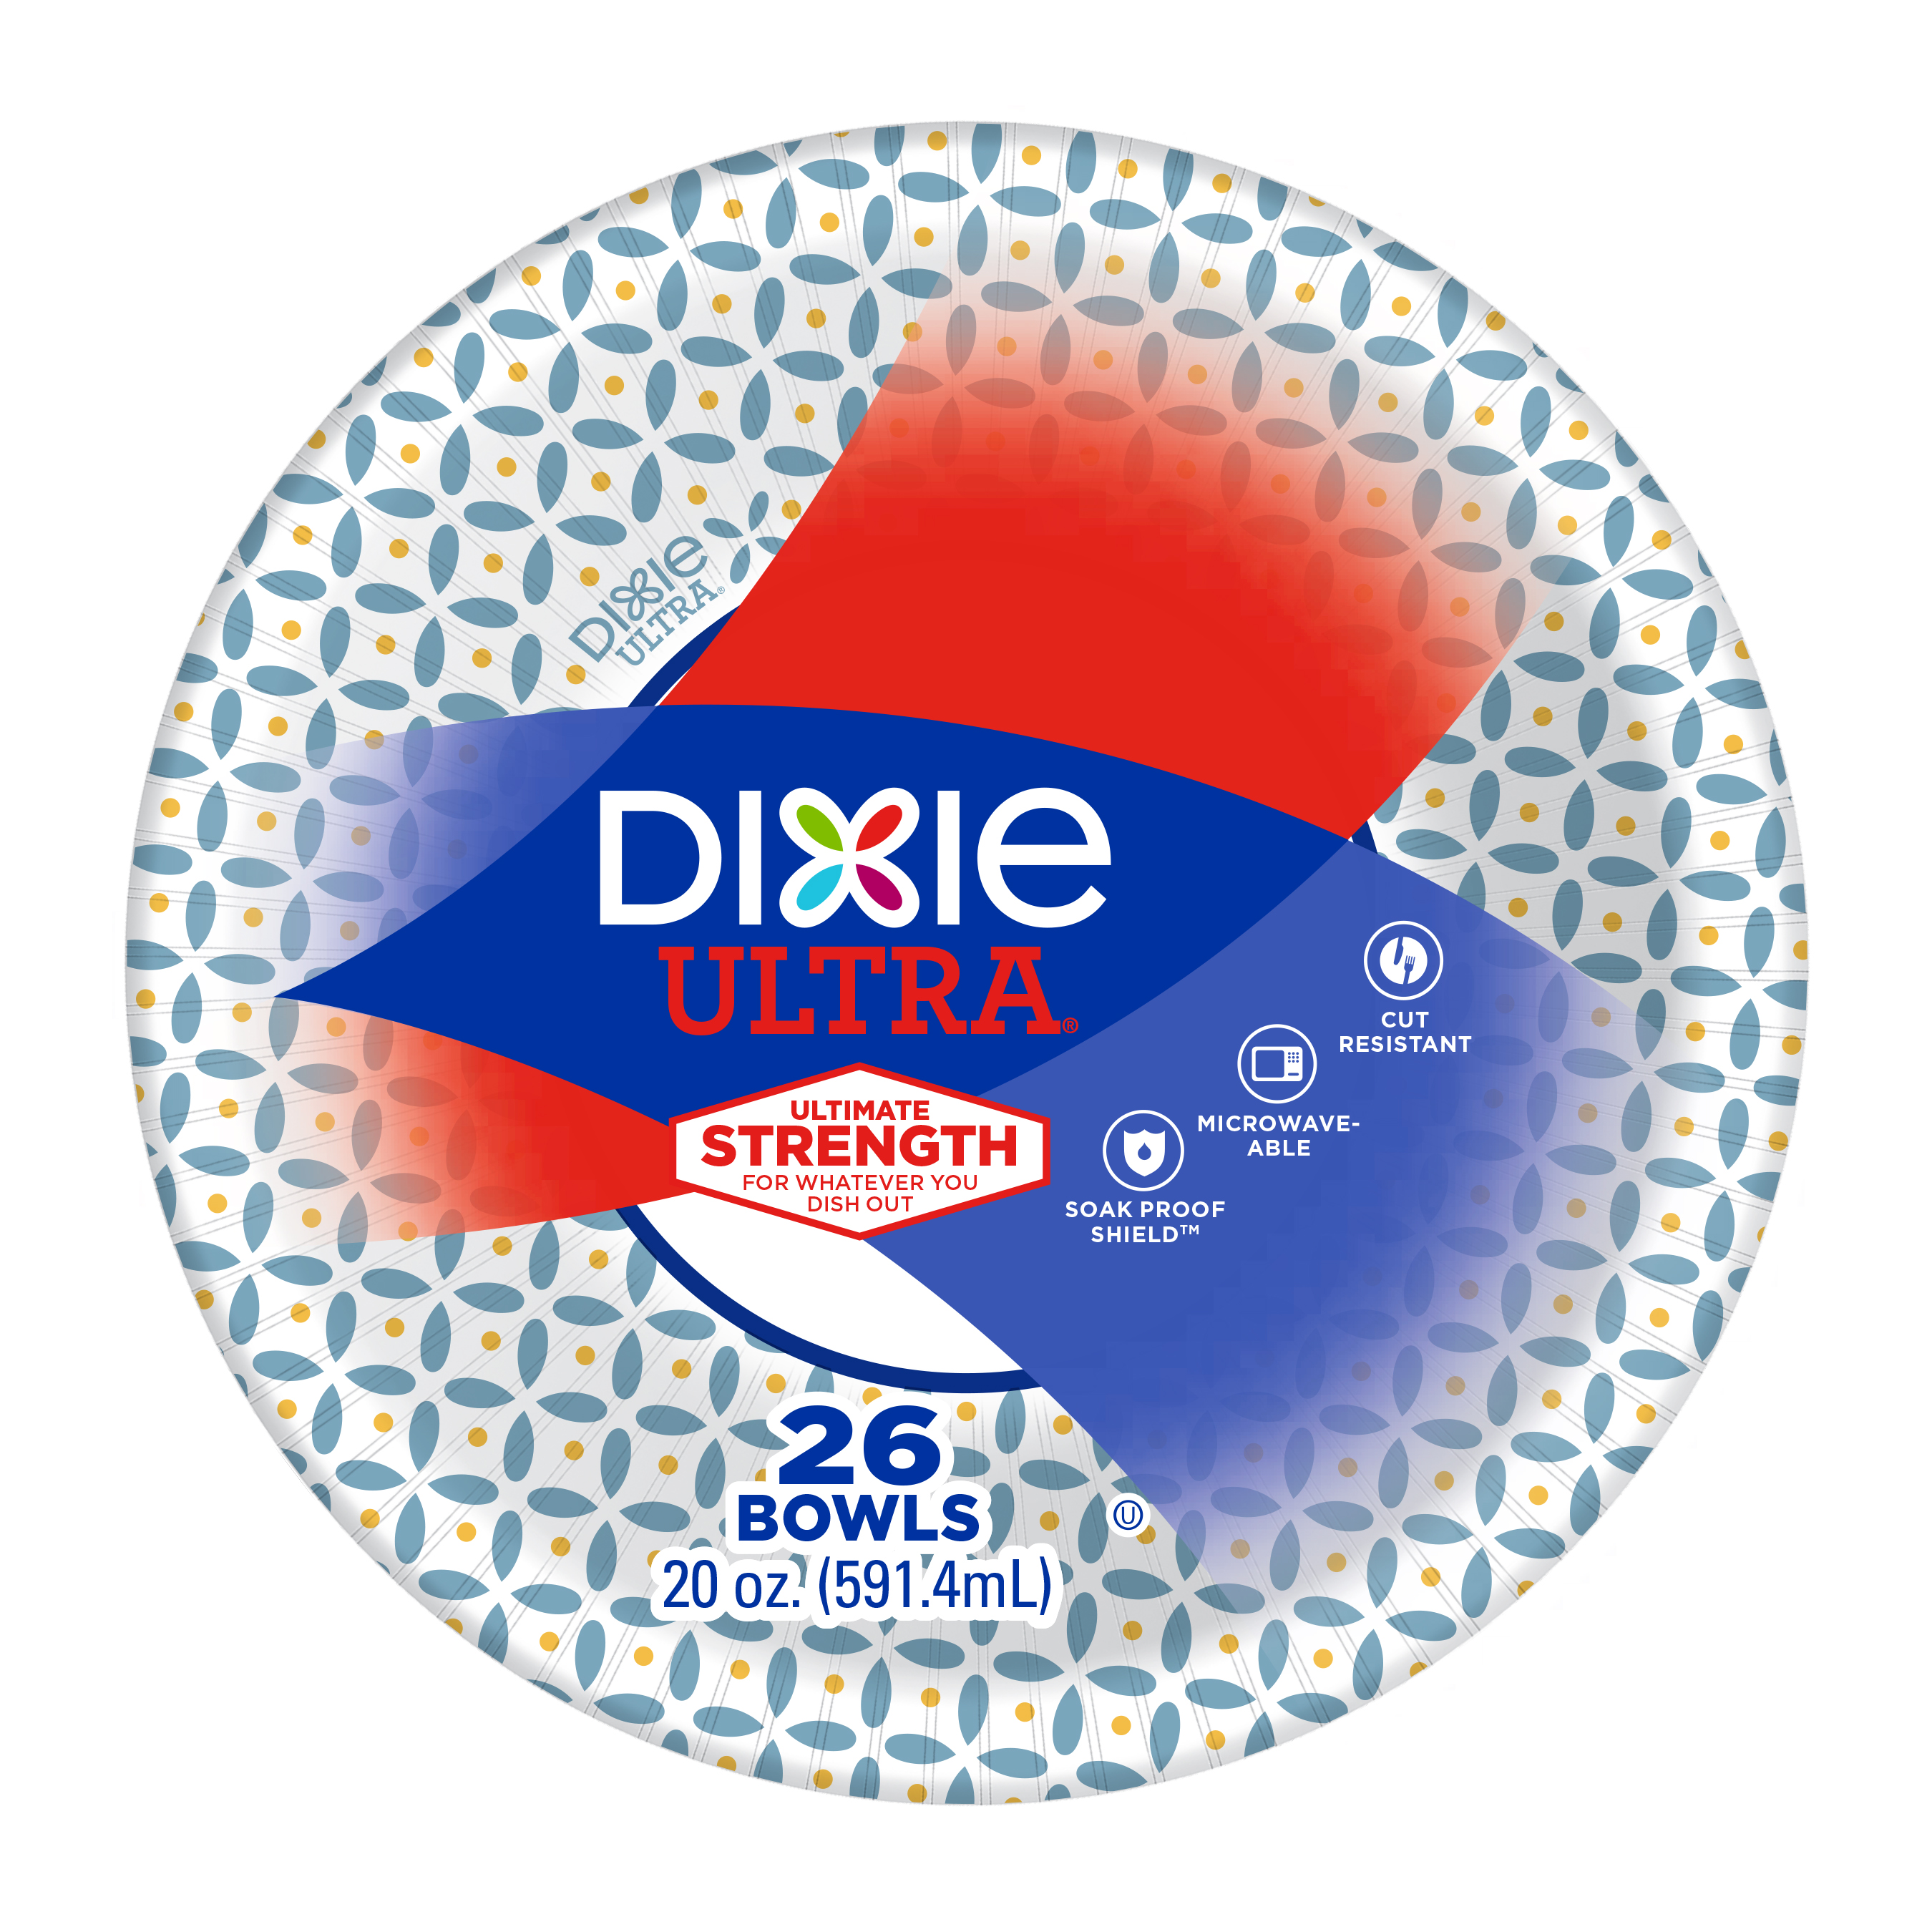 Dixie Ultra Paper Bowls, 20 oz, 26 count - image 1 of 10